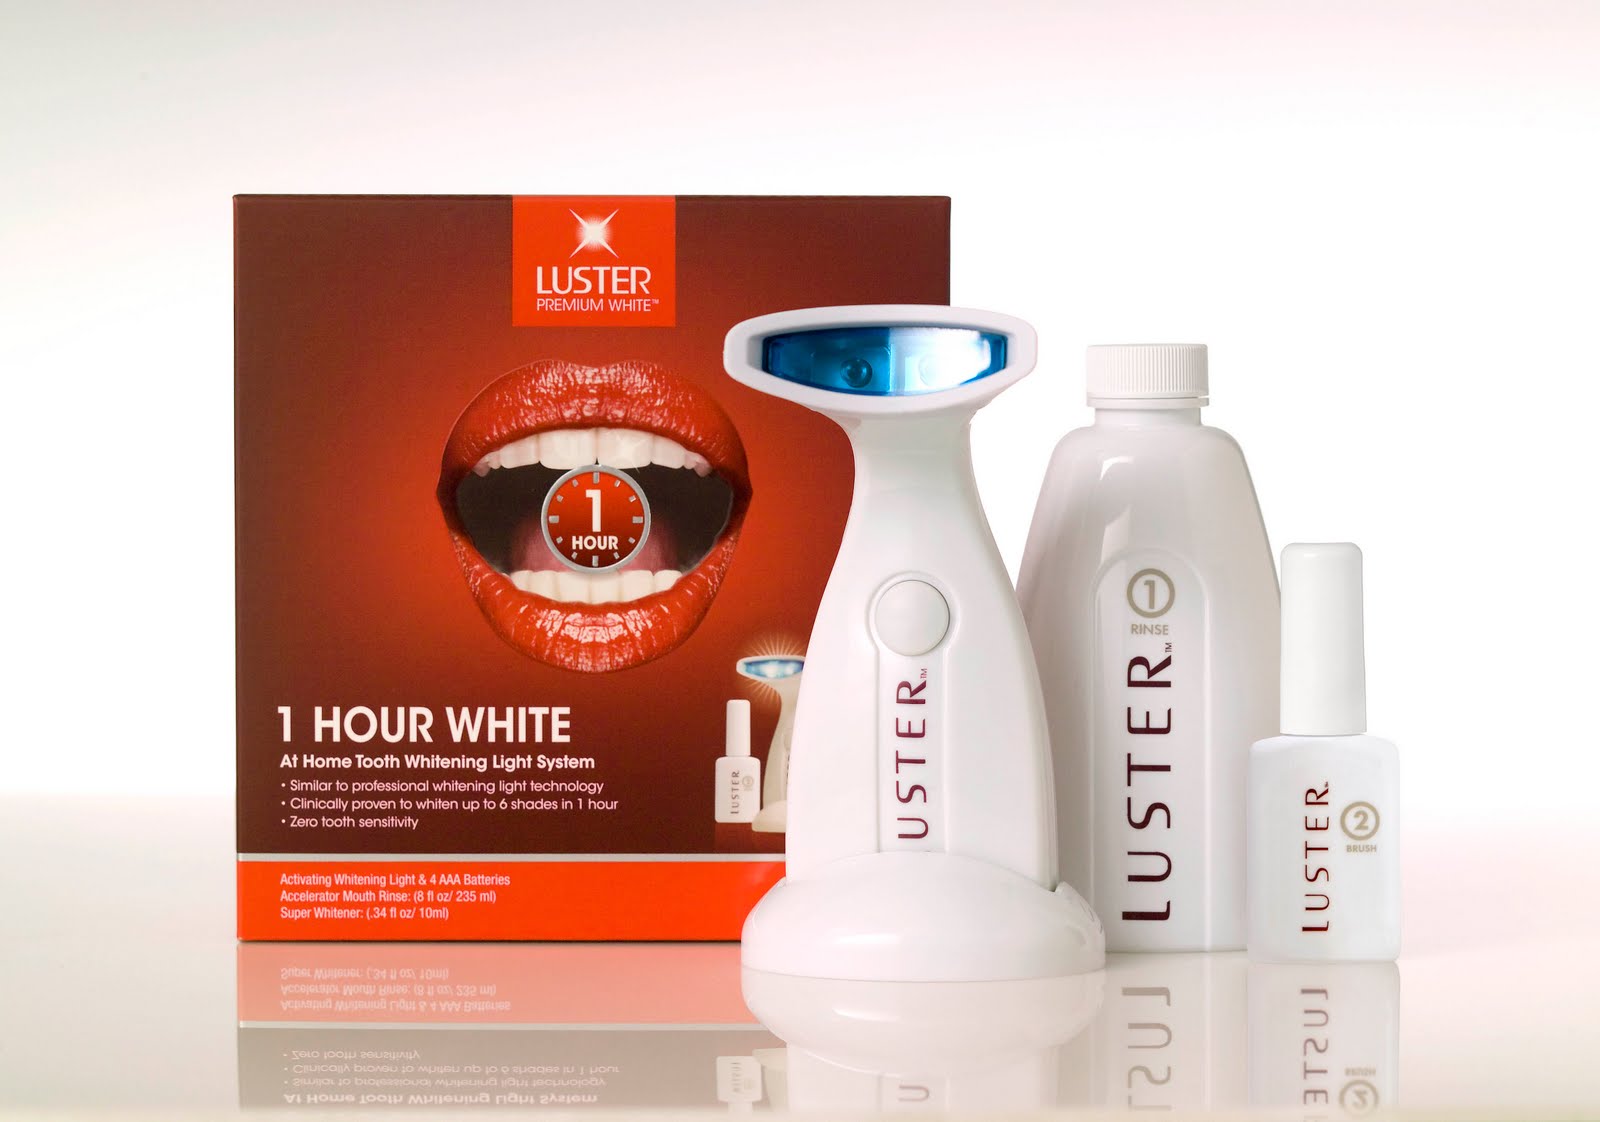 Luster Premium White 1-Hour White At Home Tooth Whitening Light System 